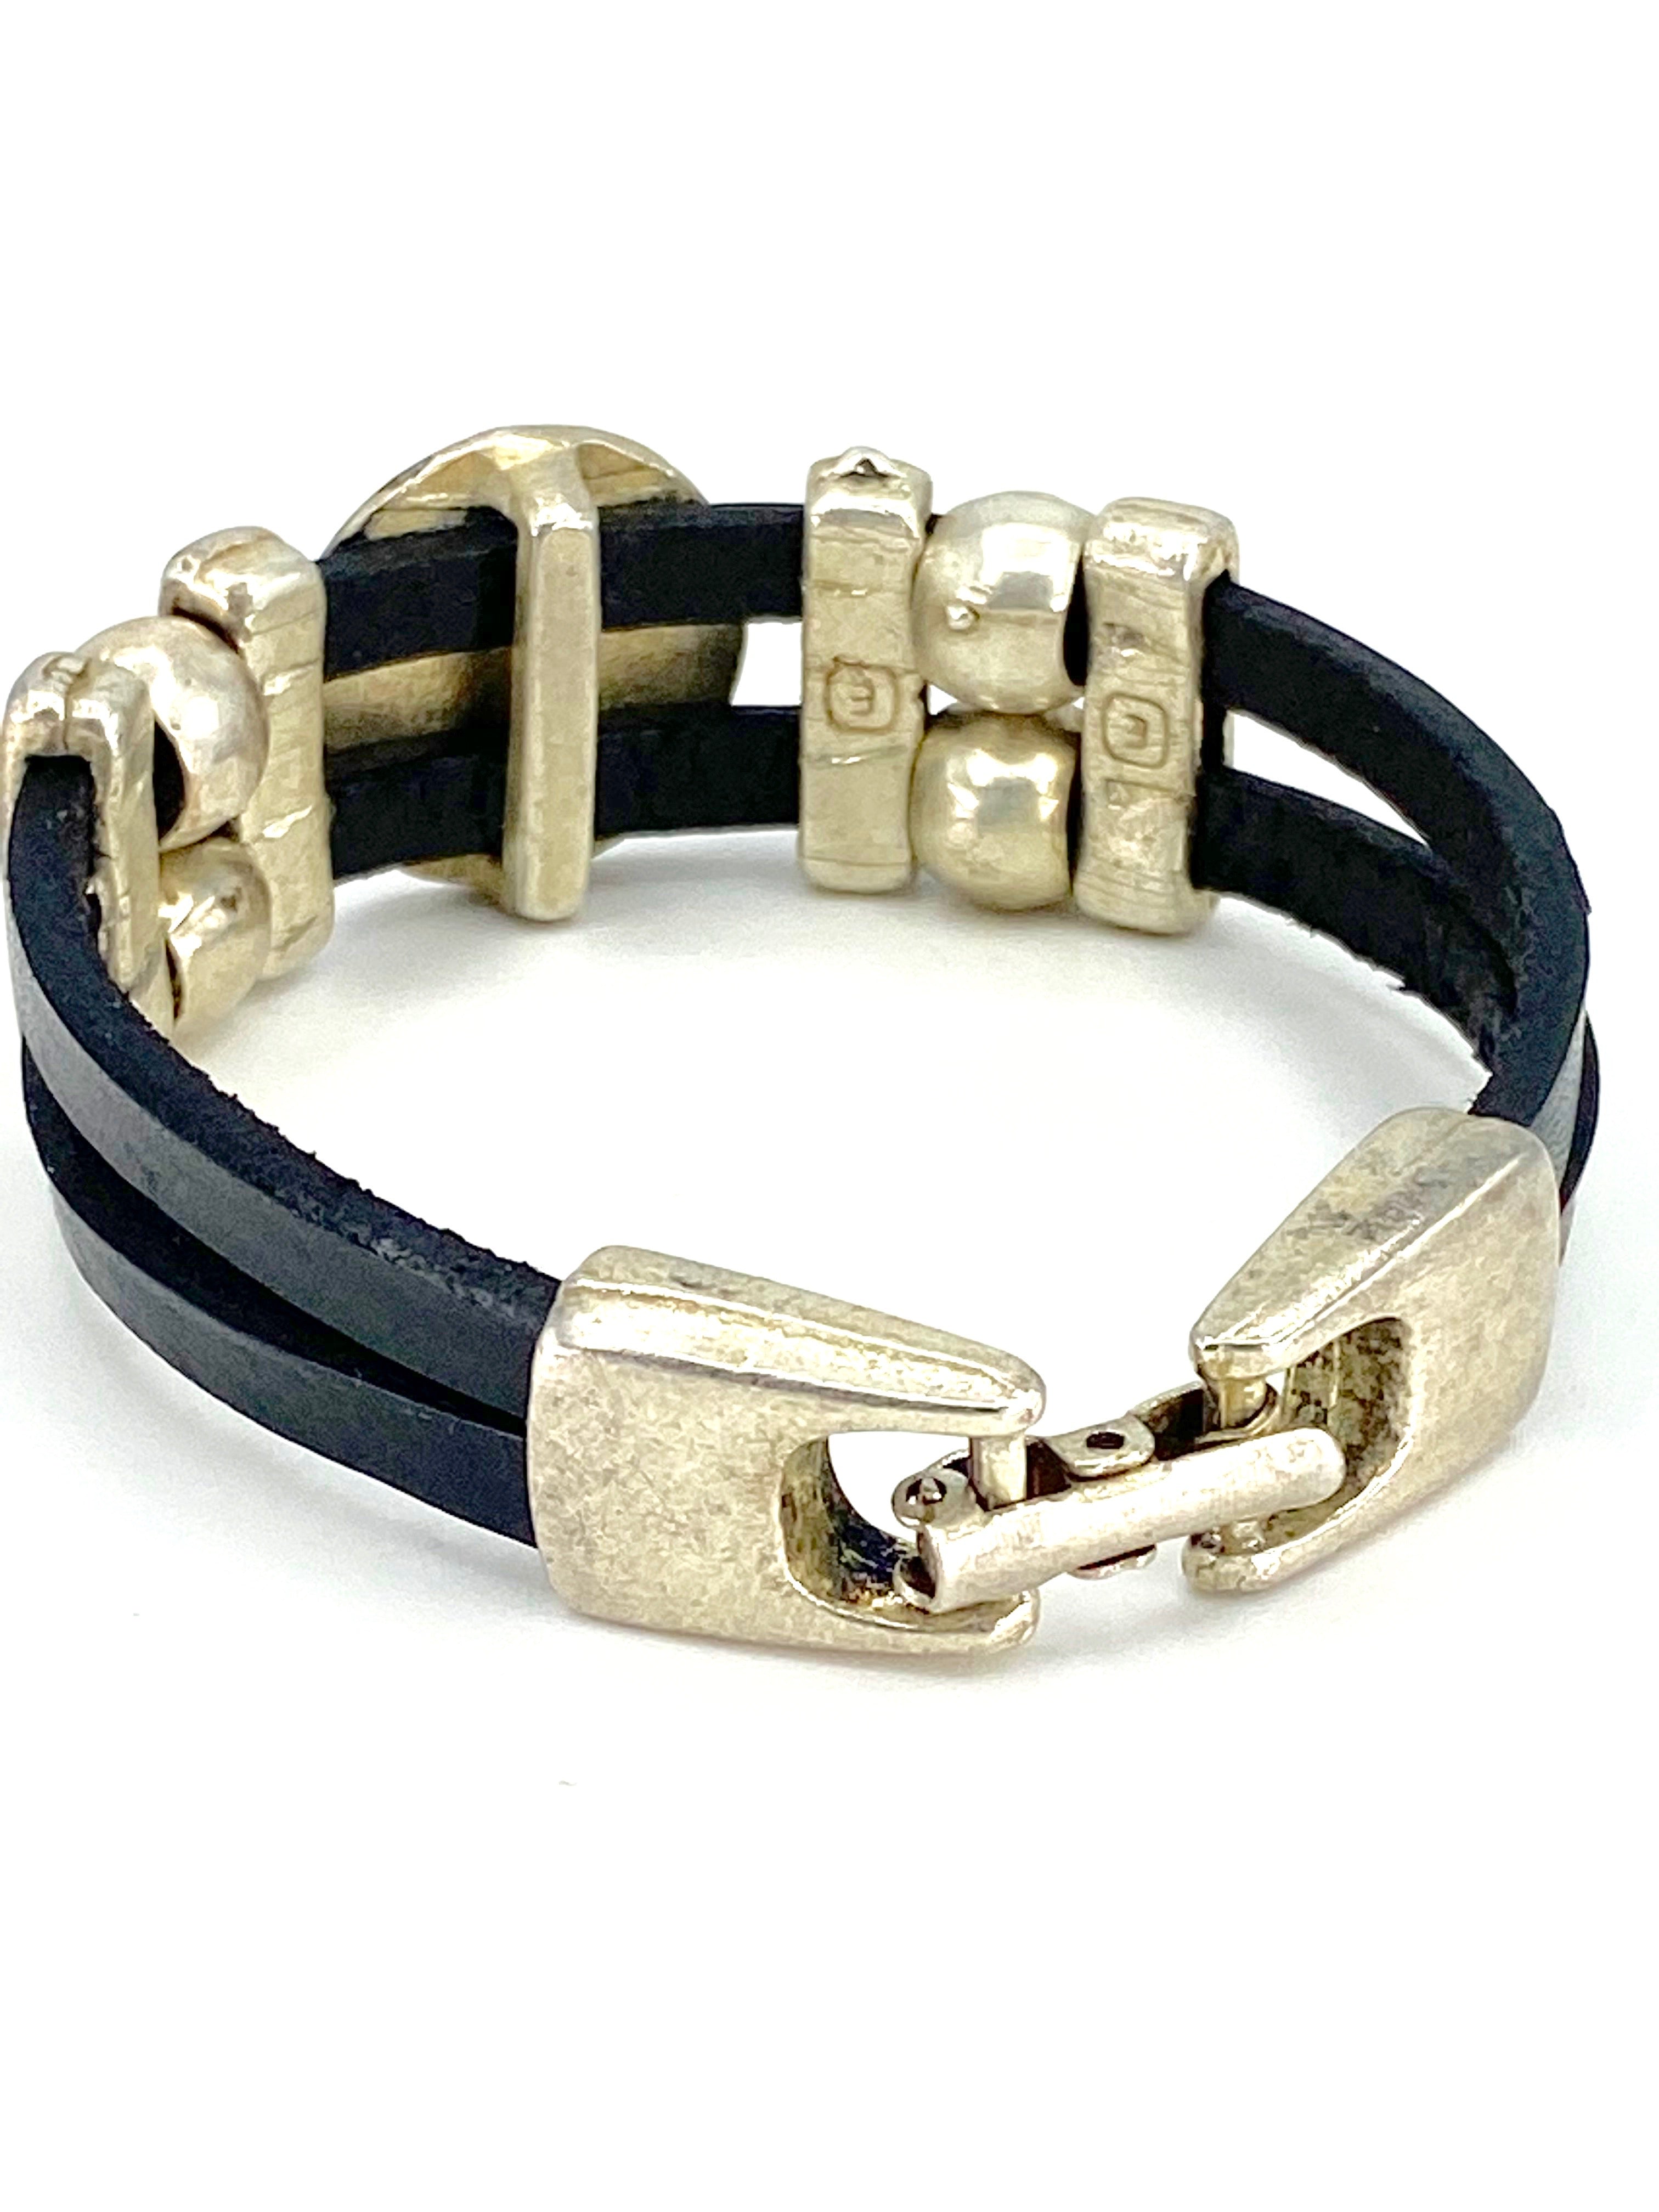 Vintage Virgen Mary bracelet handmade jewelry with Double Leather strap by Graciela's Collection